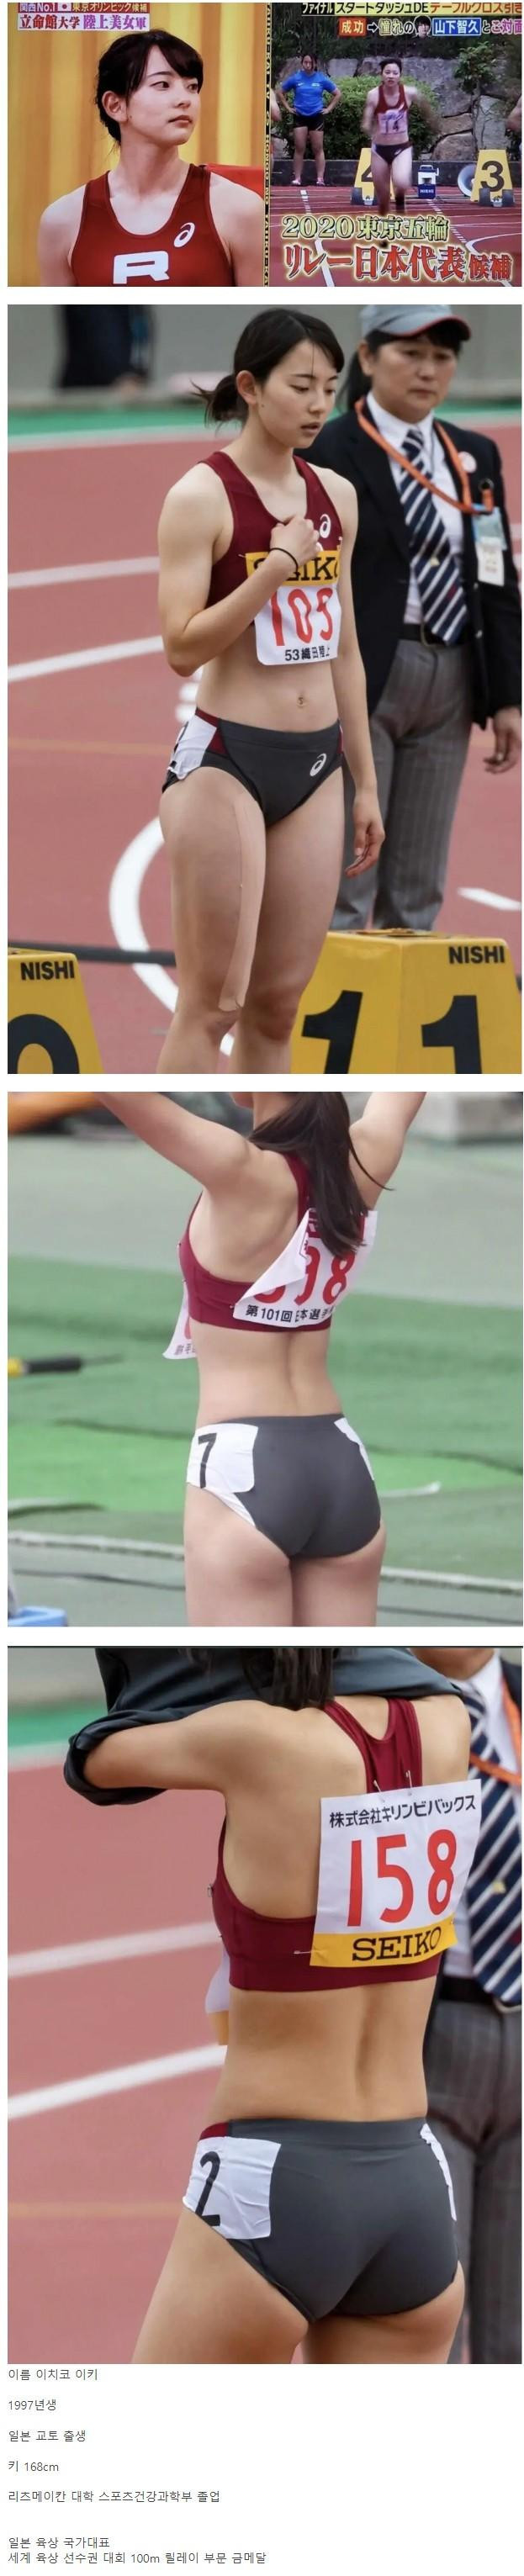 Women's track and field athlete's elastic lower body